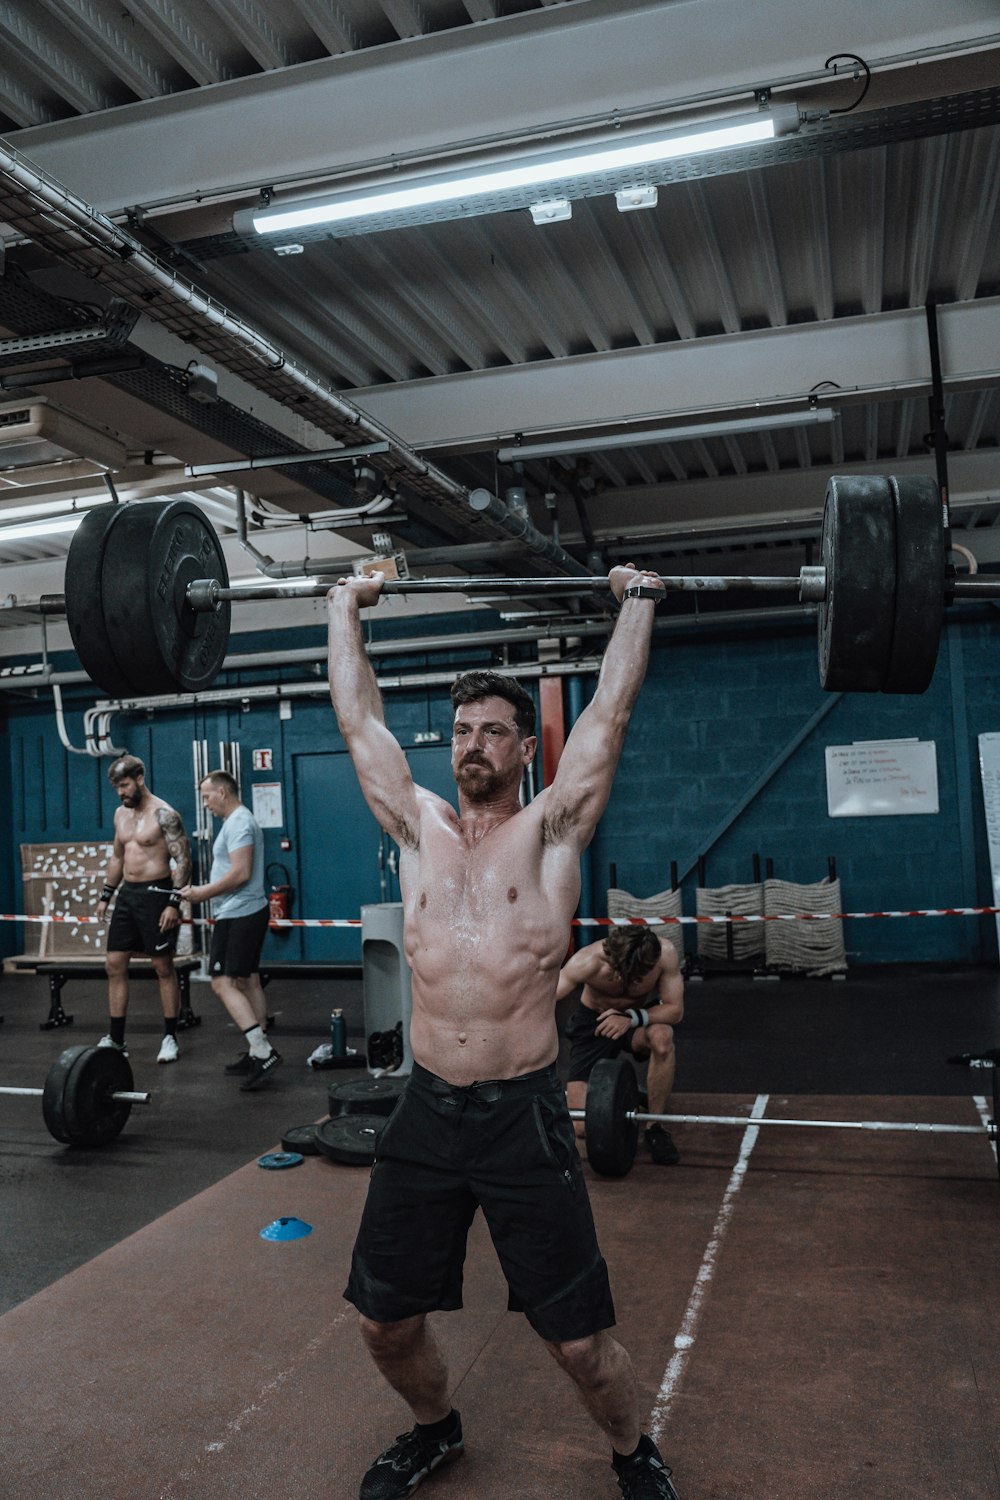 a shirtless man lifting a barbell in a gym